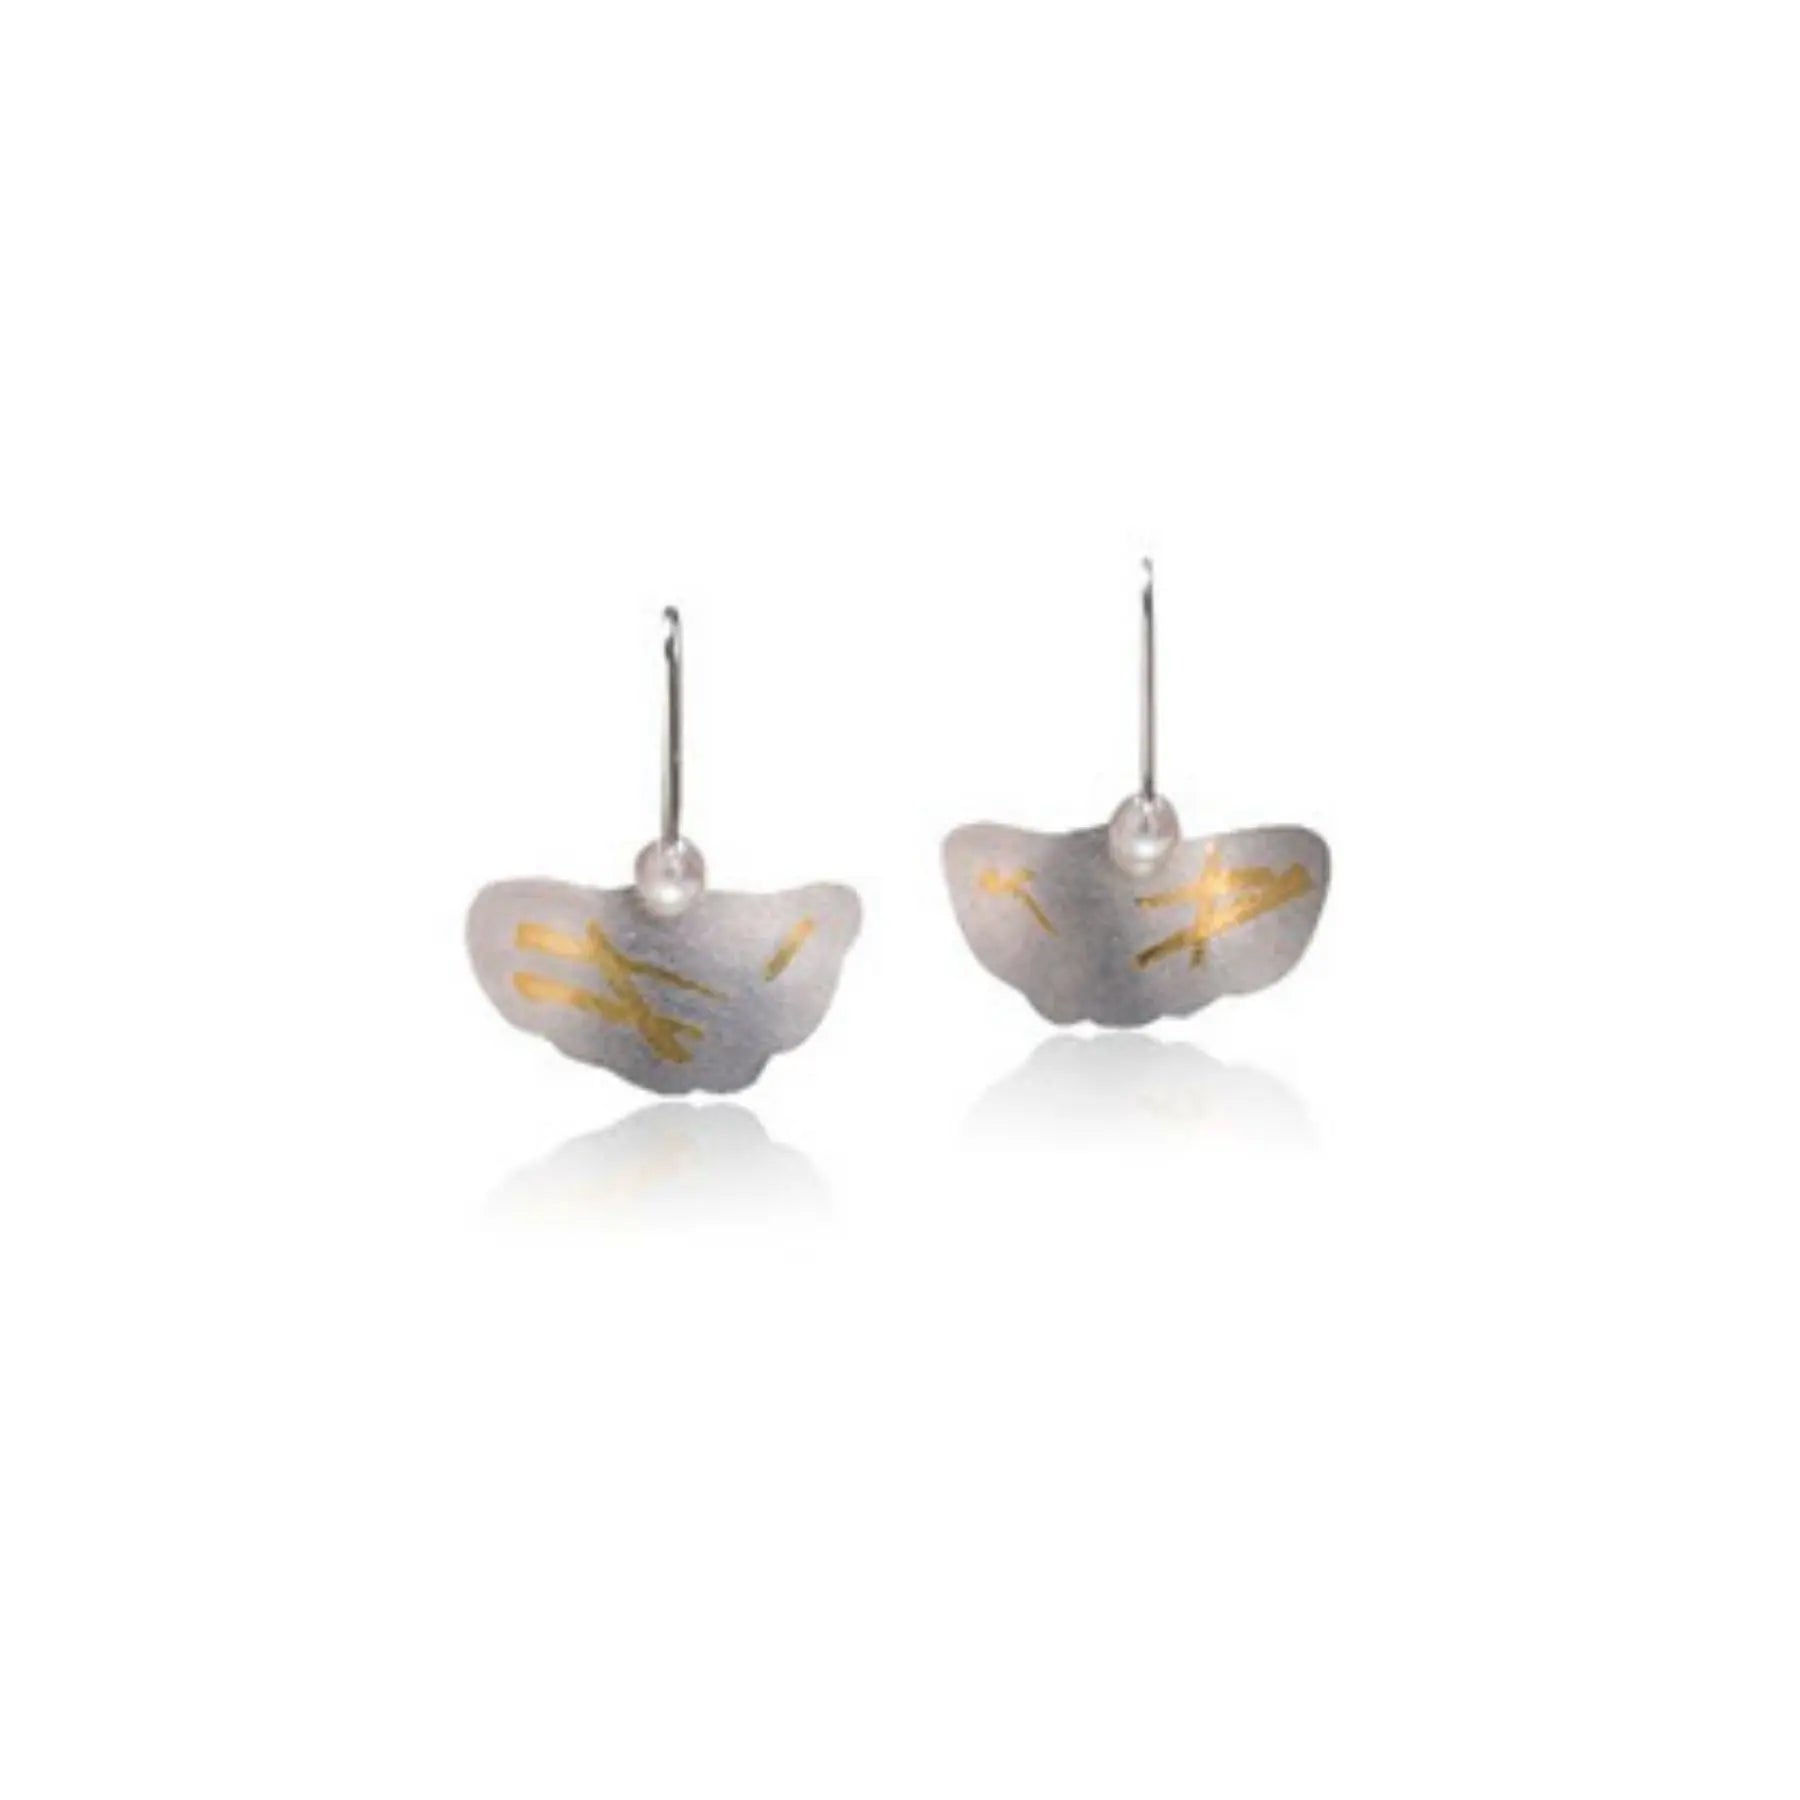 Ginkgo Earrings With Keum Boo And Freshwater Pearls Keum Boo One-of-a-Kind Pearls